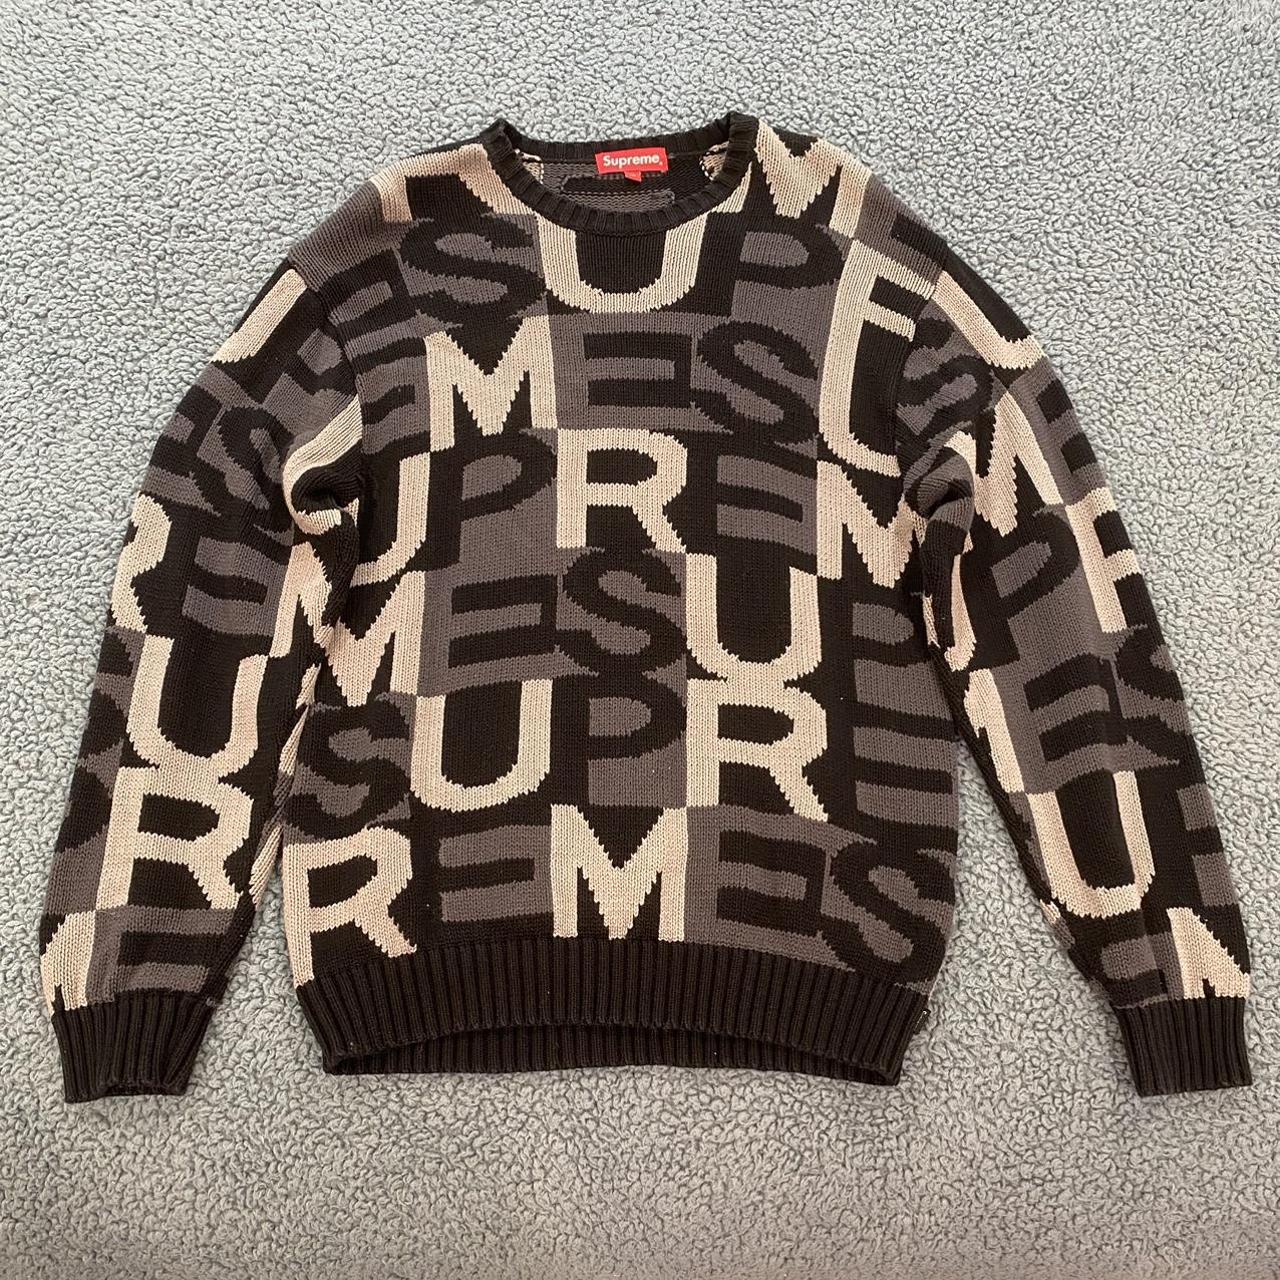 Supreme Logo Knitted Sweater Barely worn and in... - Depop